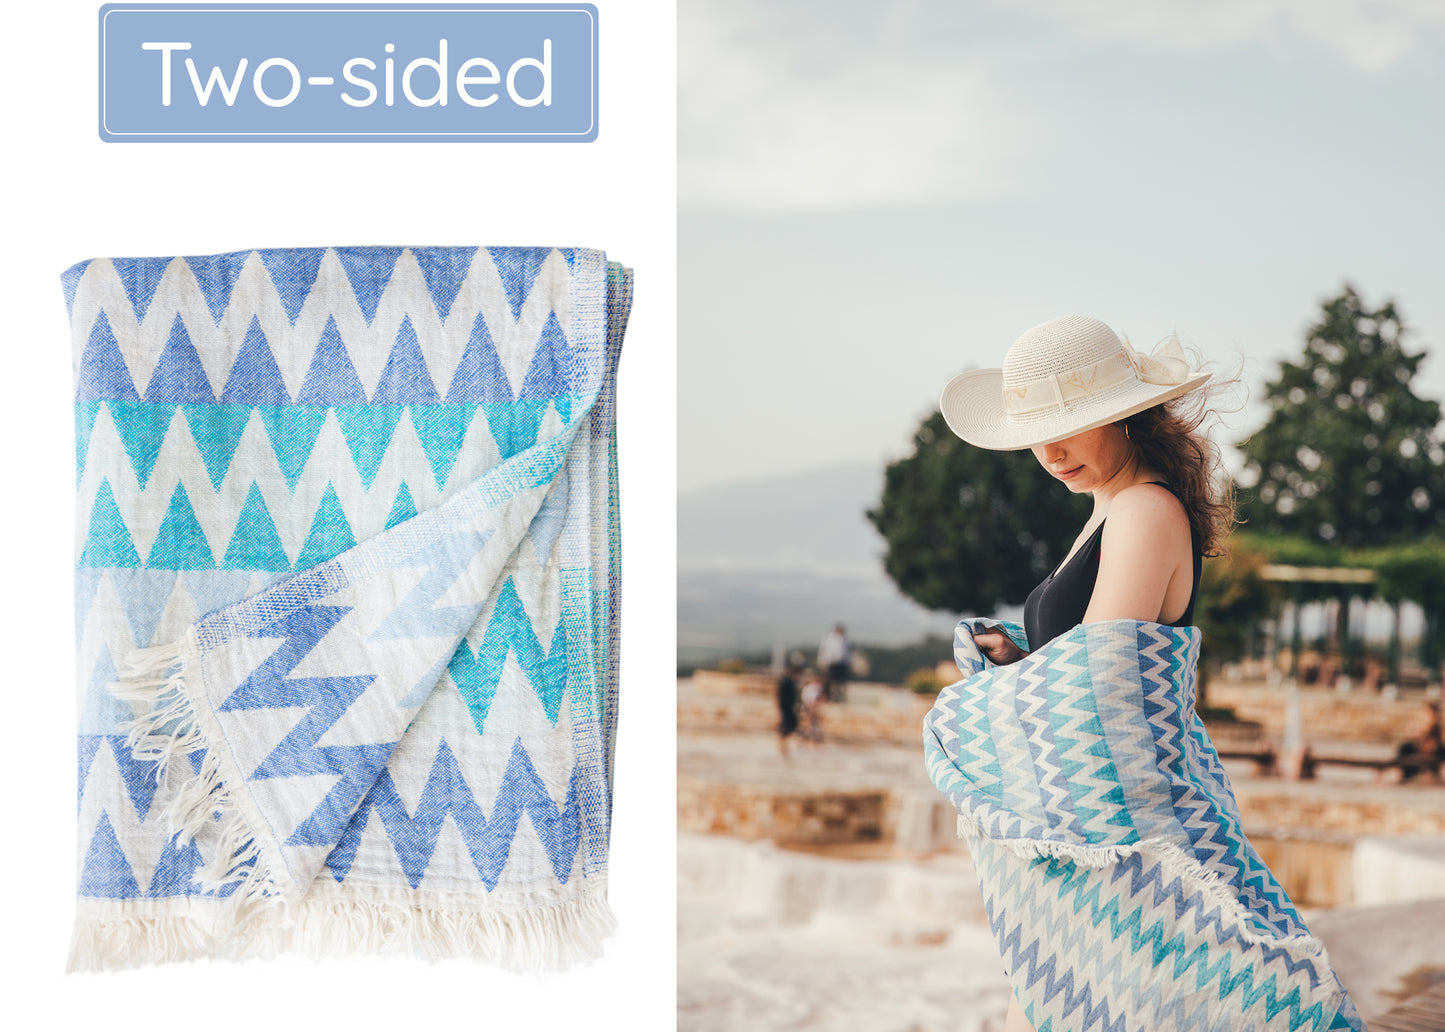 Shades of Blue Turkish Beach Towel (35”x67”)  Lightweight, Quick drying and Sand Free Can be Used as Beach Blanket 100% Cotton ZigZag Design